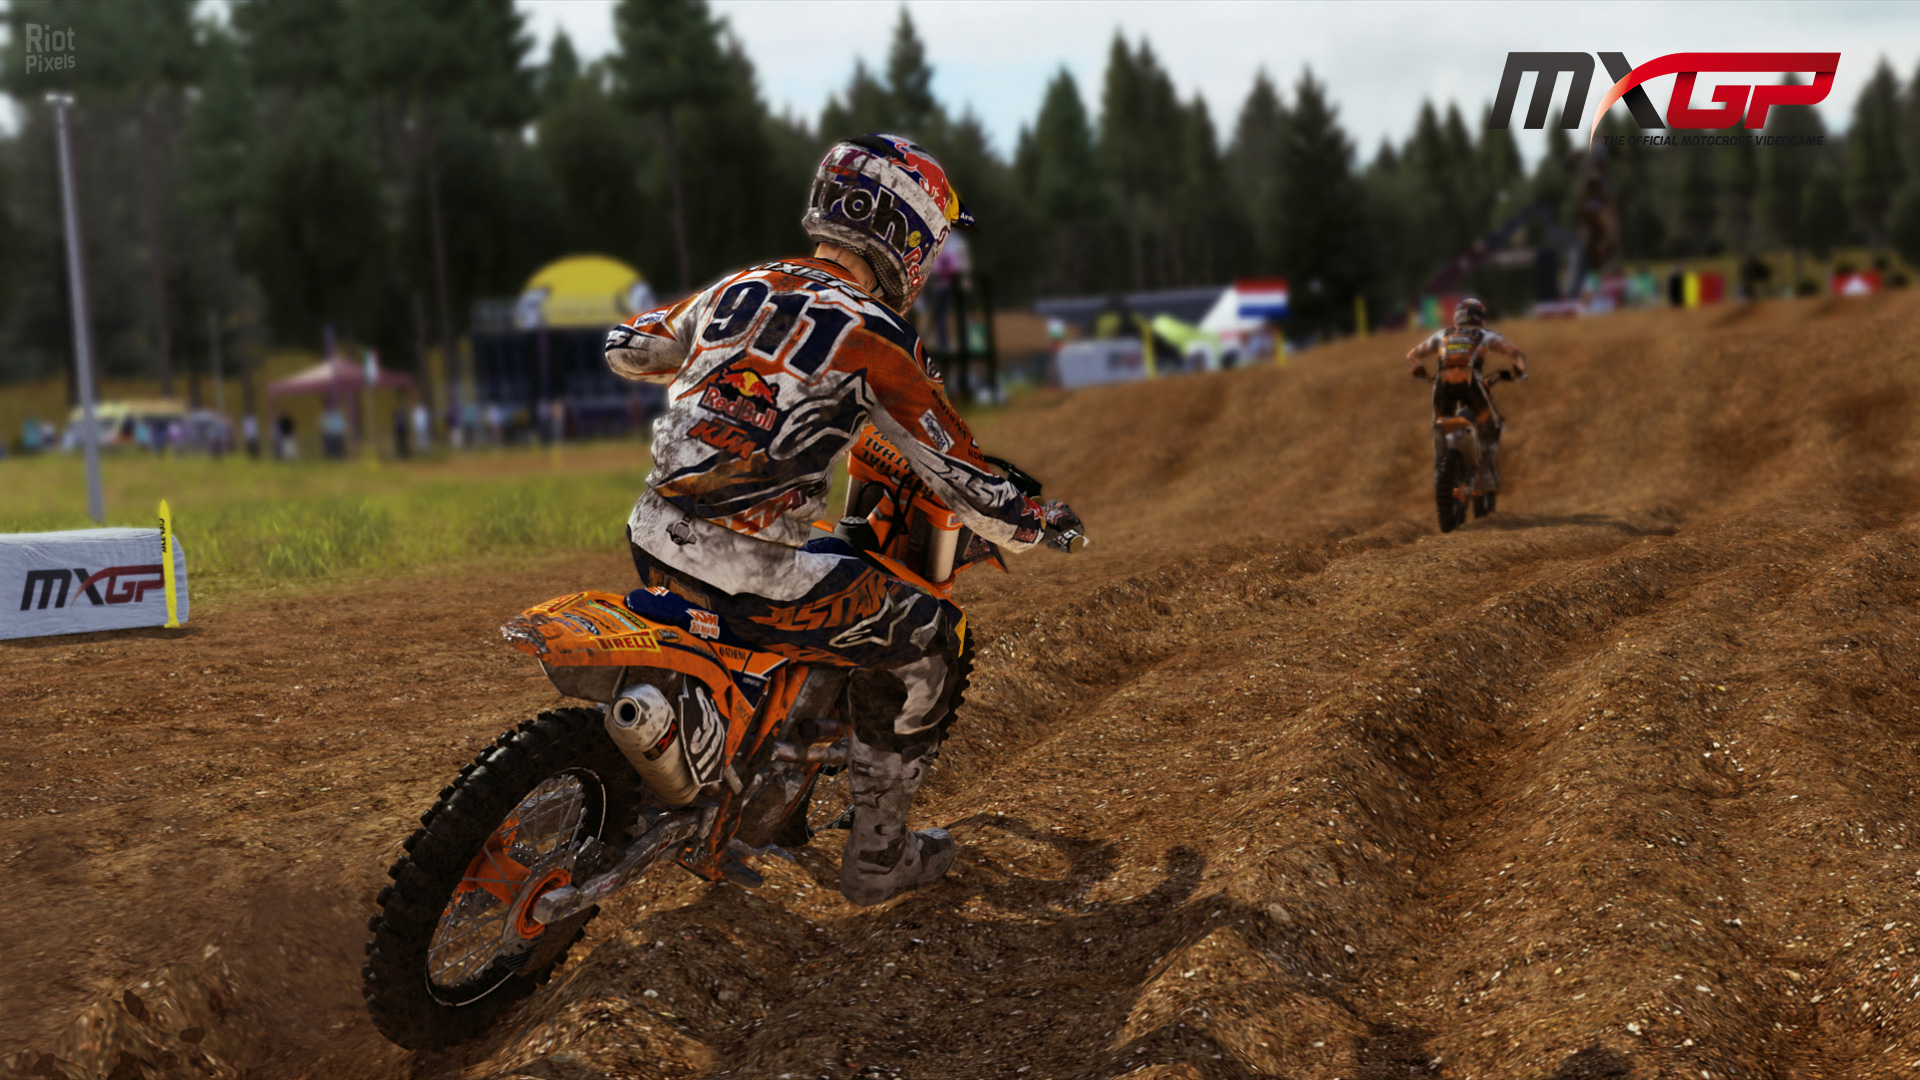 Mxgp the official motocross videogame steam фото 76